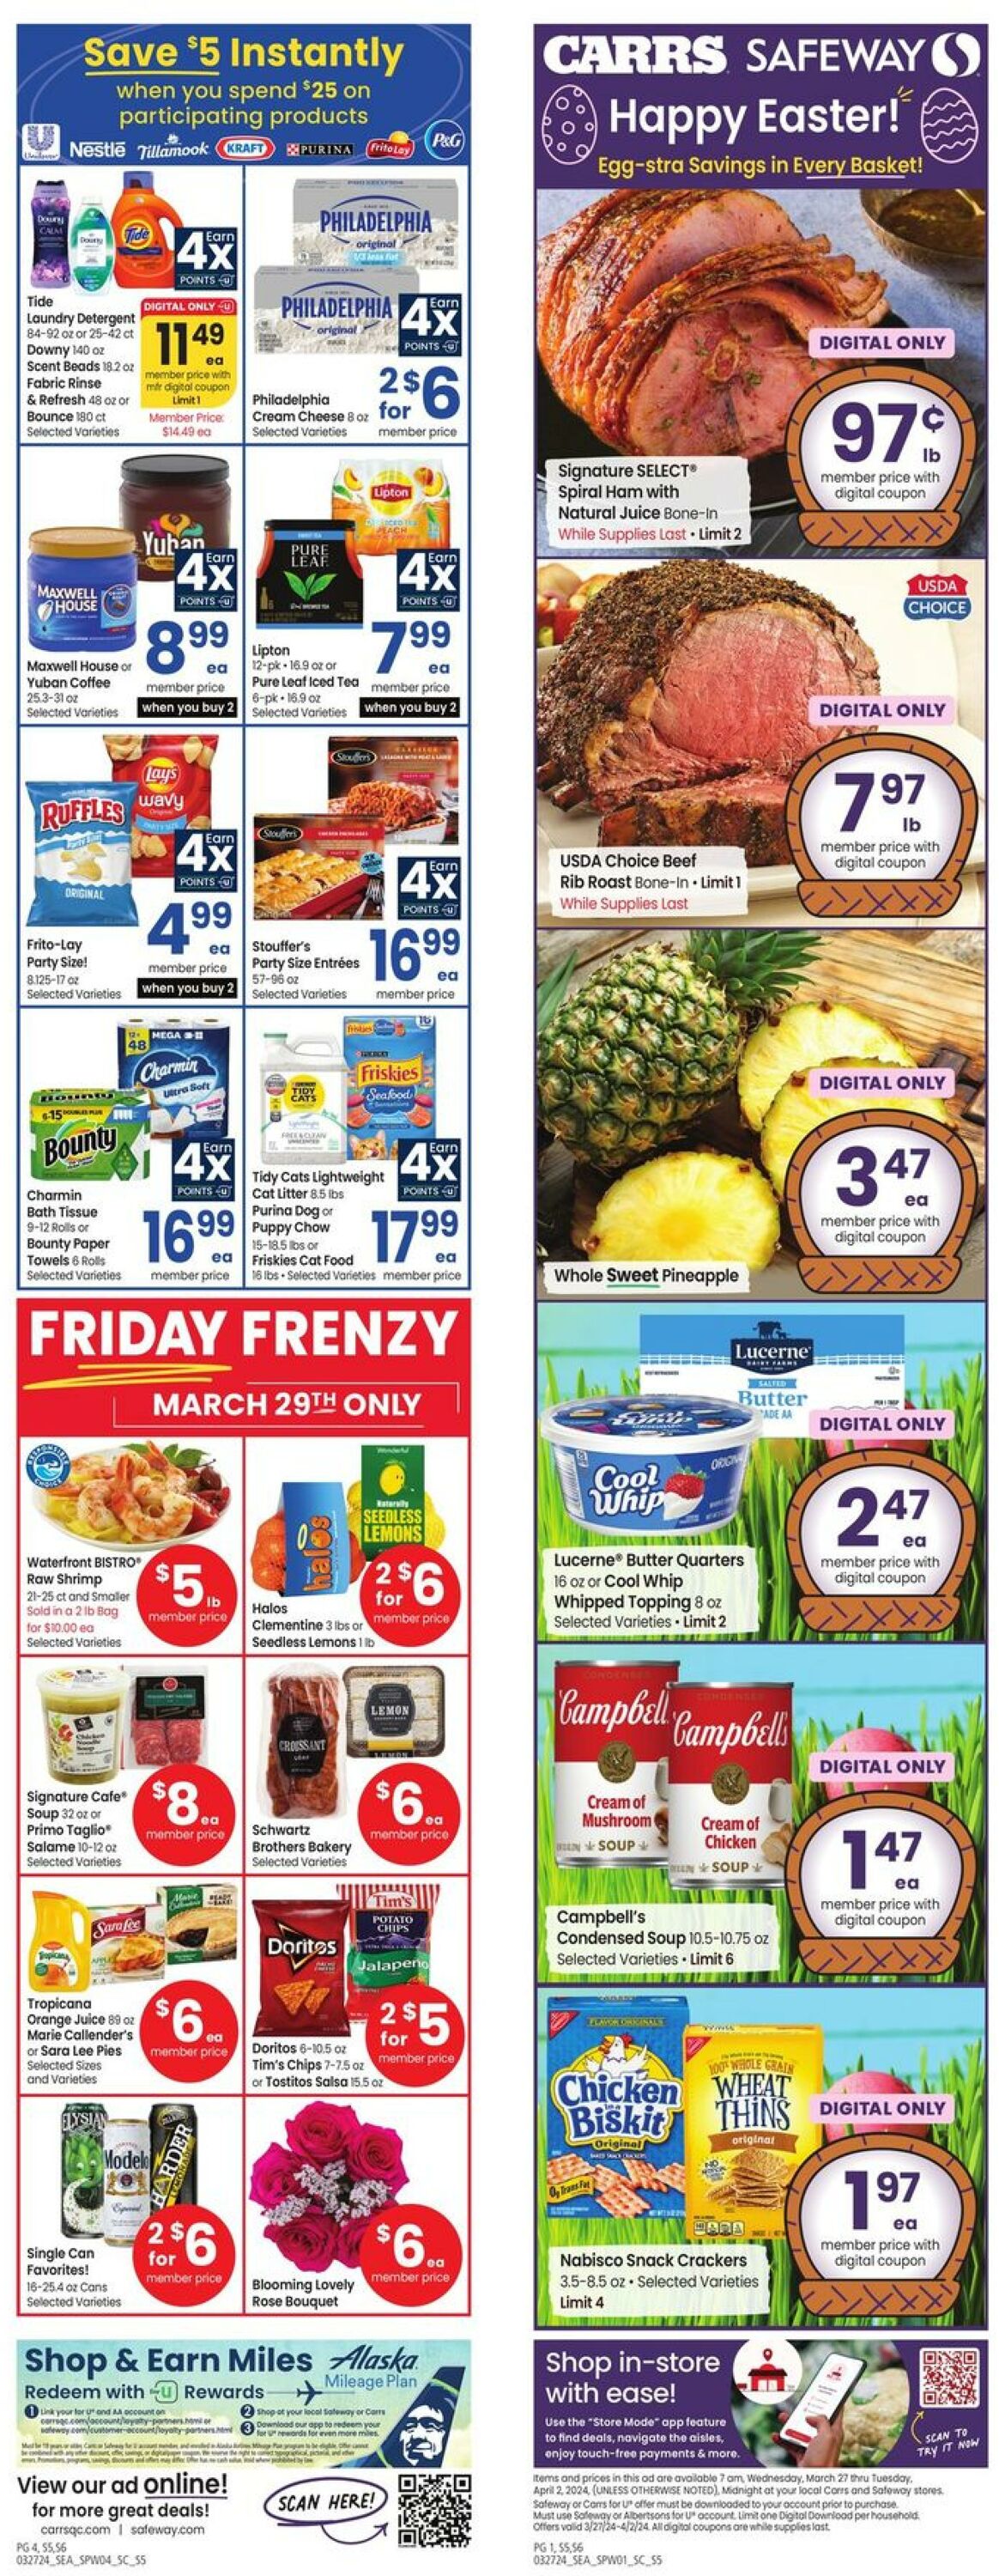 Carrs Promotional weekly ads